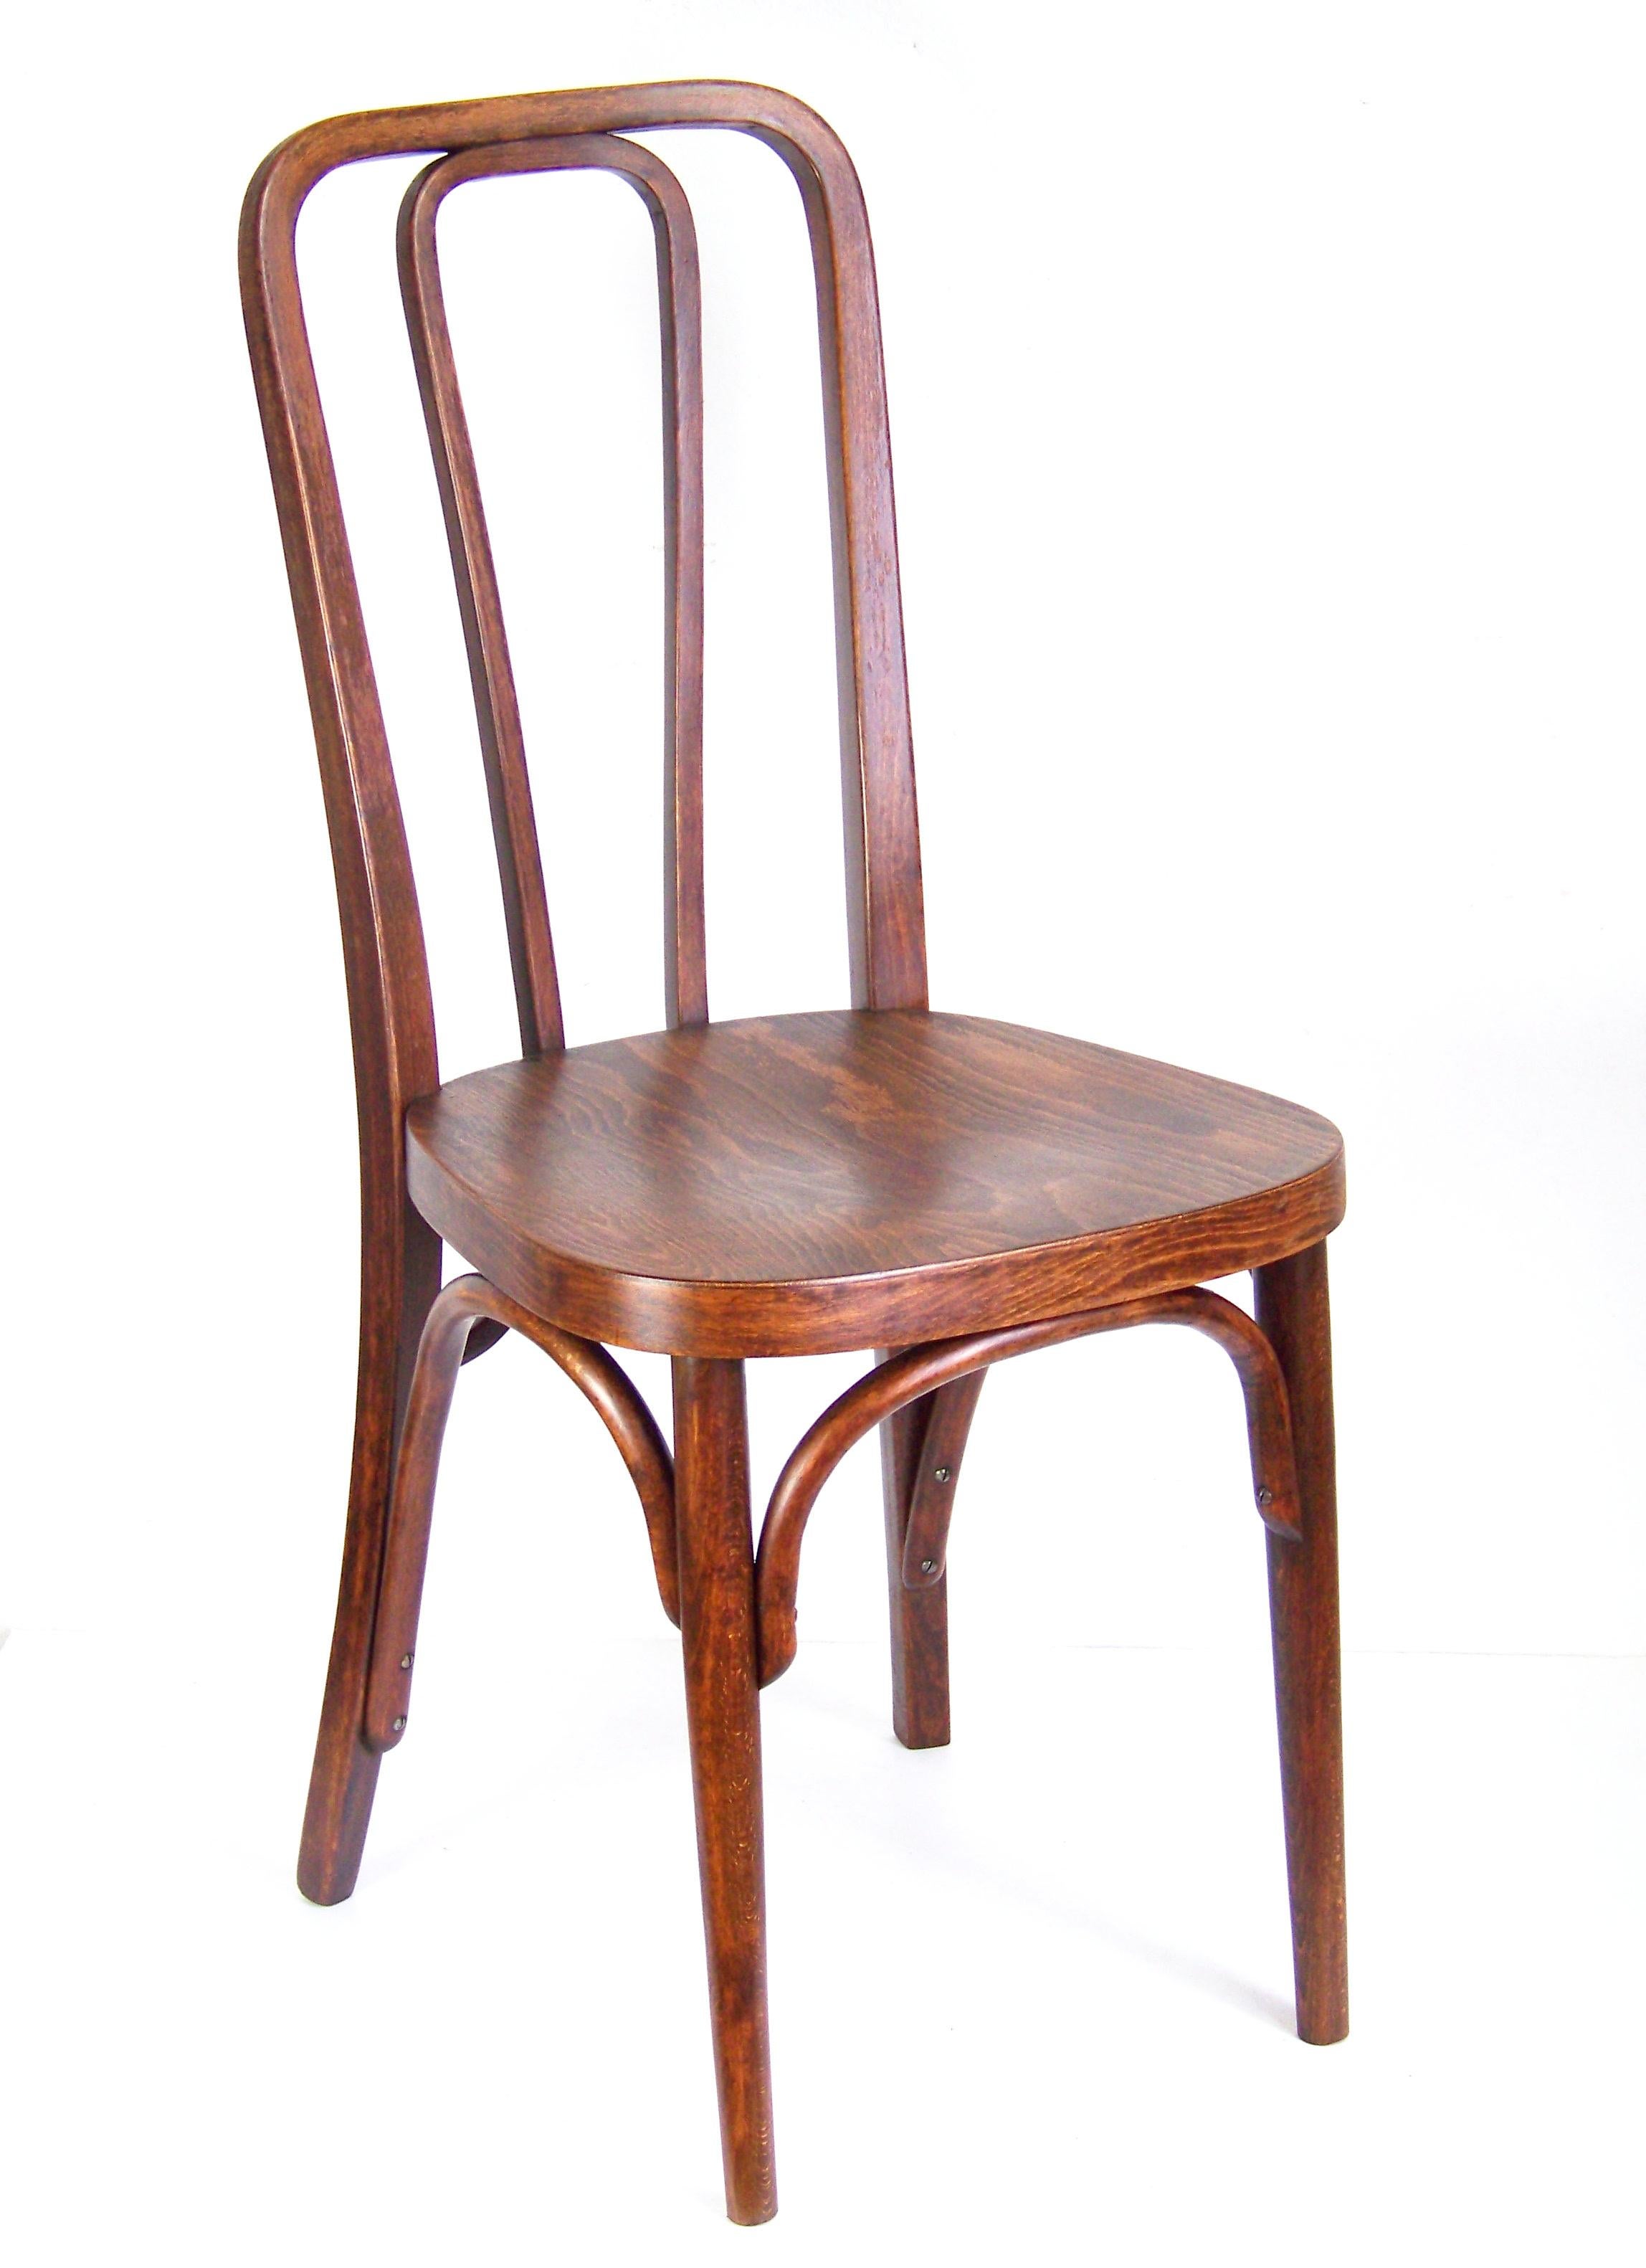 Manufactured in Austria by the Gebrüder Thonet company after year 1911. Original state with a pleasant patine of age, perfectly cleaned and re-polished with shellac polish.